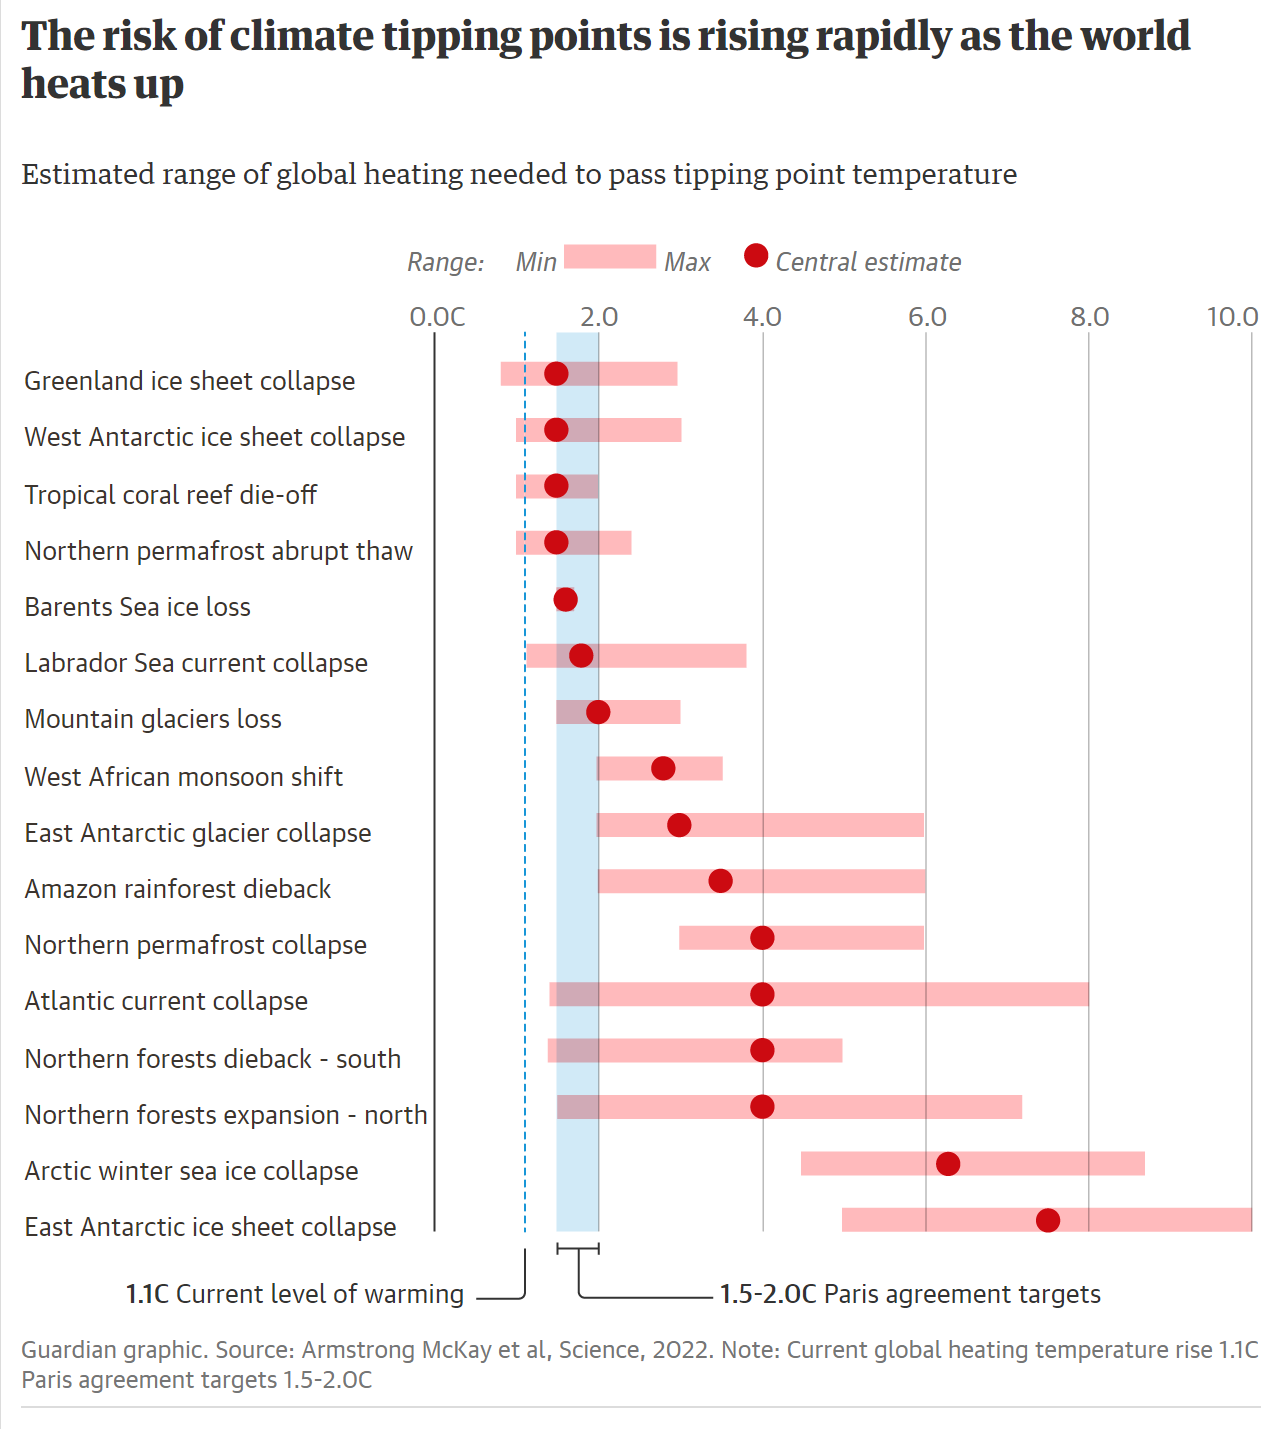 Estimated range of global heating needed to pass tipping point temperature. Data: Armstrong McKay et al., Science, 2022. Note: Current global heating temperature rise is 1.1°C; Paris agreement targets 1.5°C-2.0°C. Graphic: The Guardian